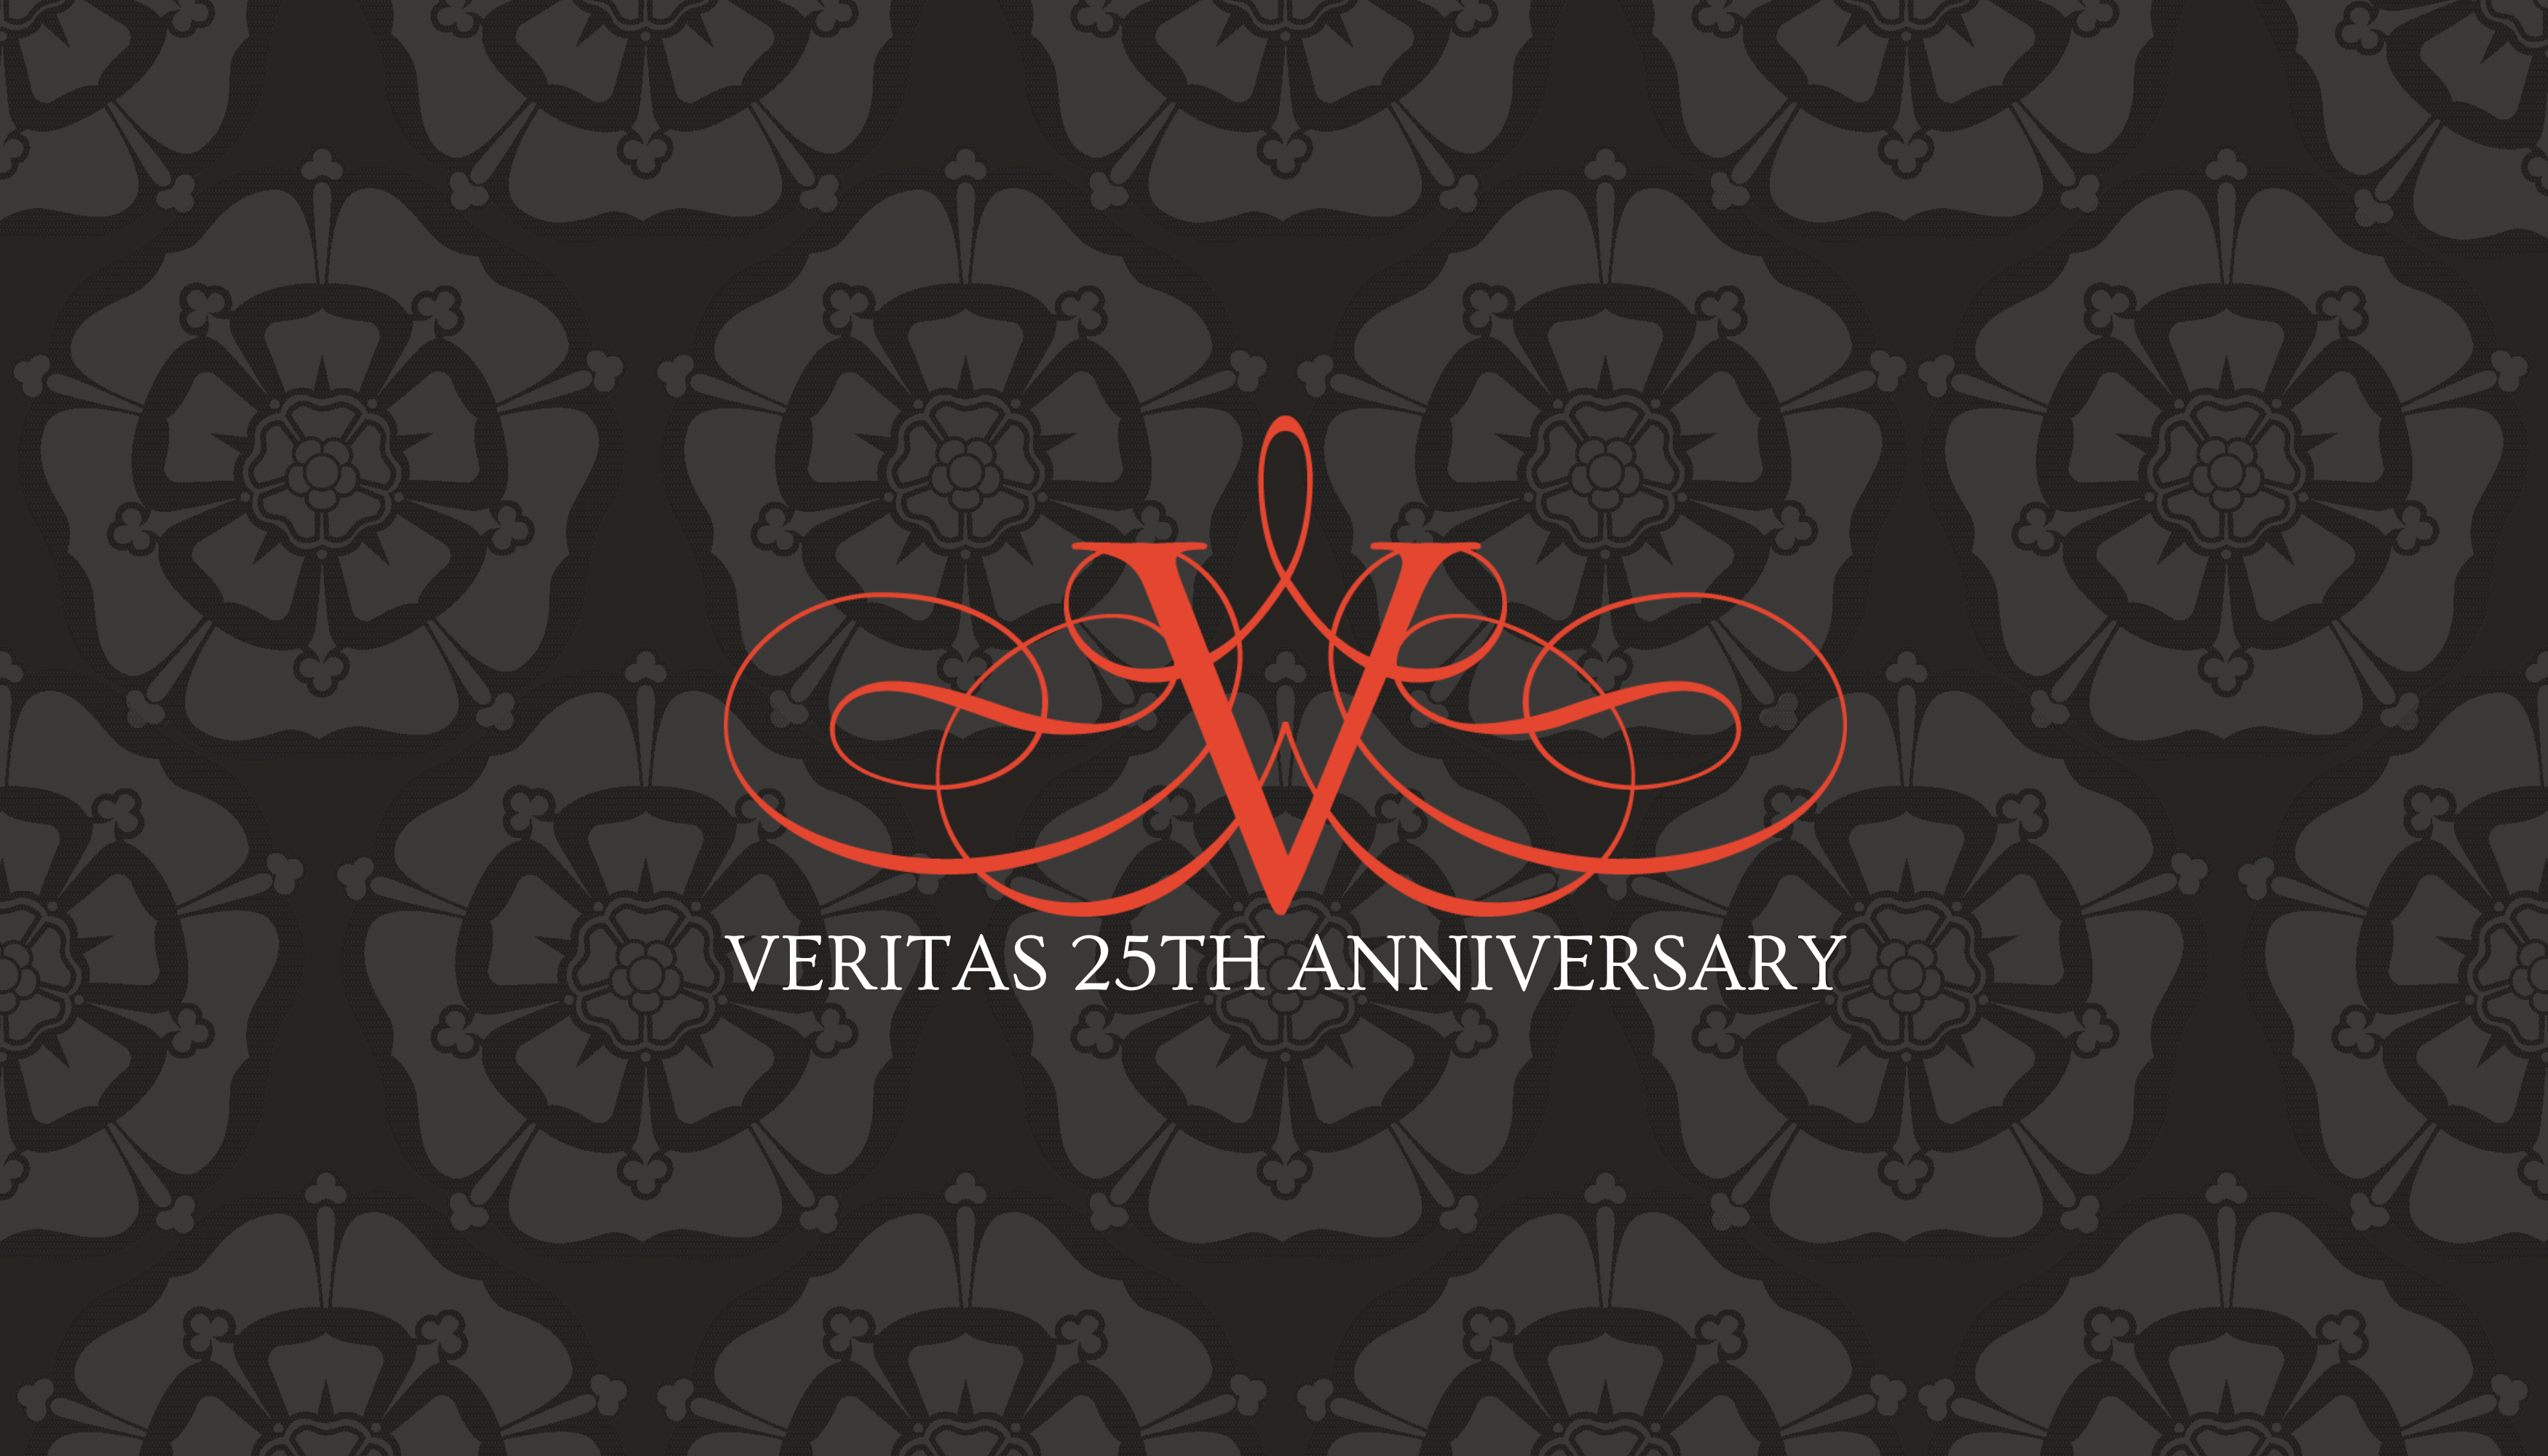 Veritas 25th Anniversary logo in red on black damask background.